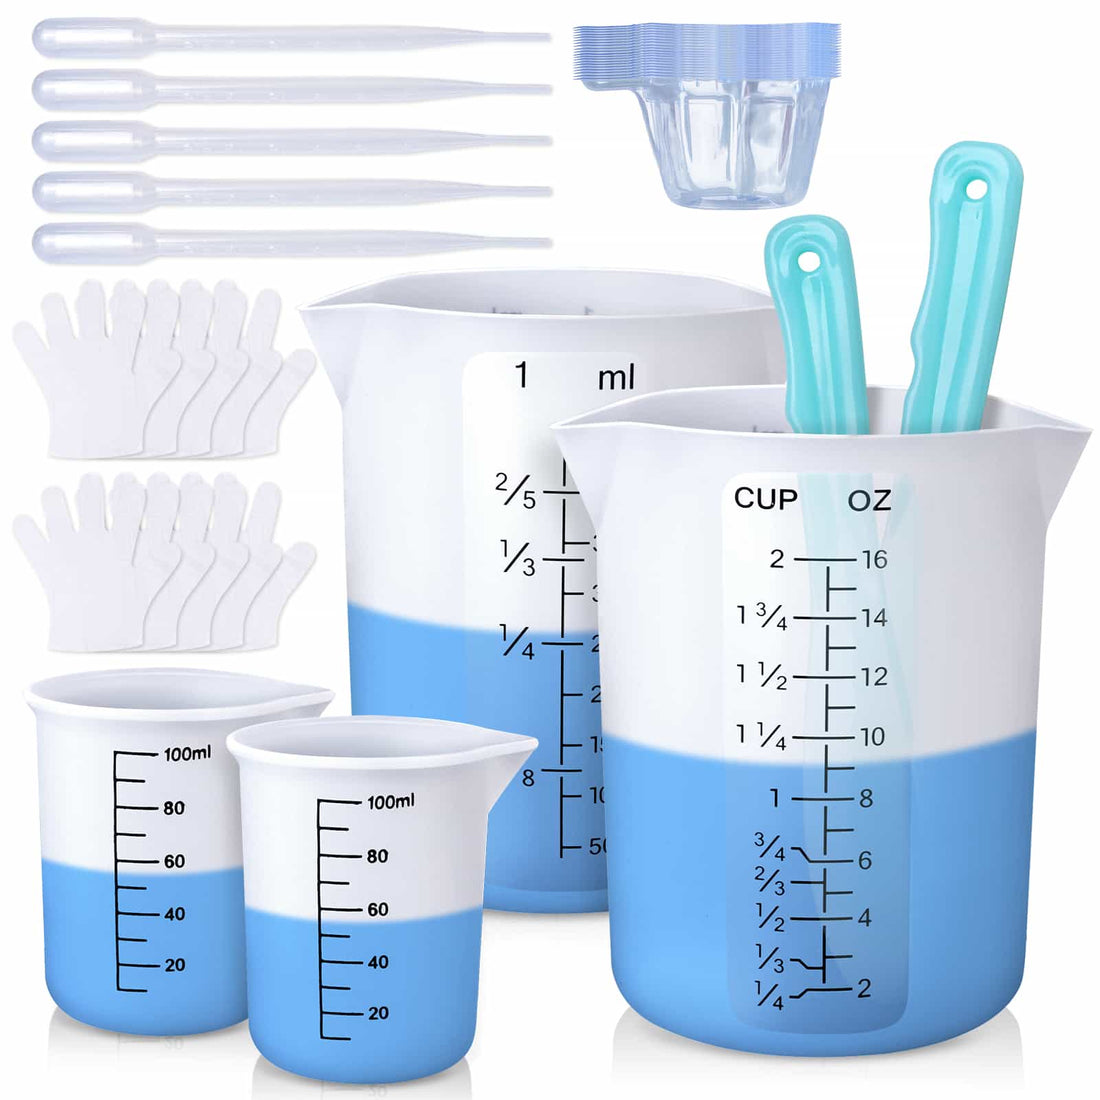 LET'S RESIN Mixing Cups Kit,200Pcs Plastic Resin Mixing Cups,30ml